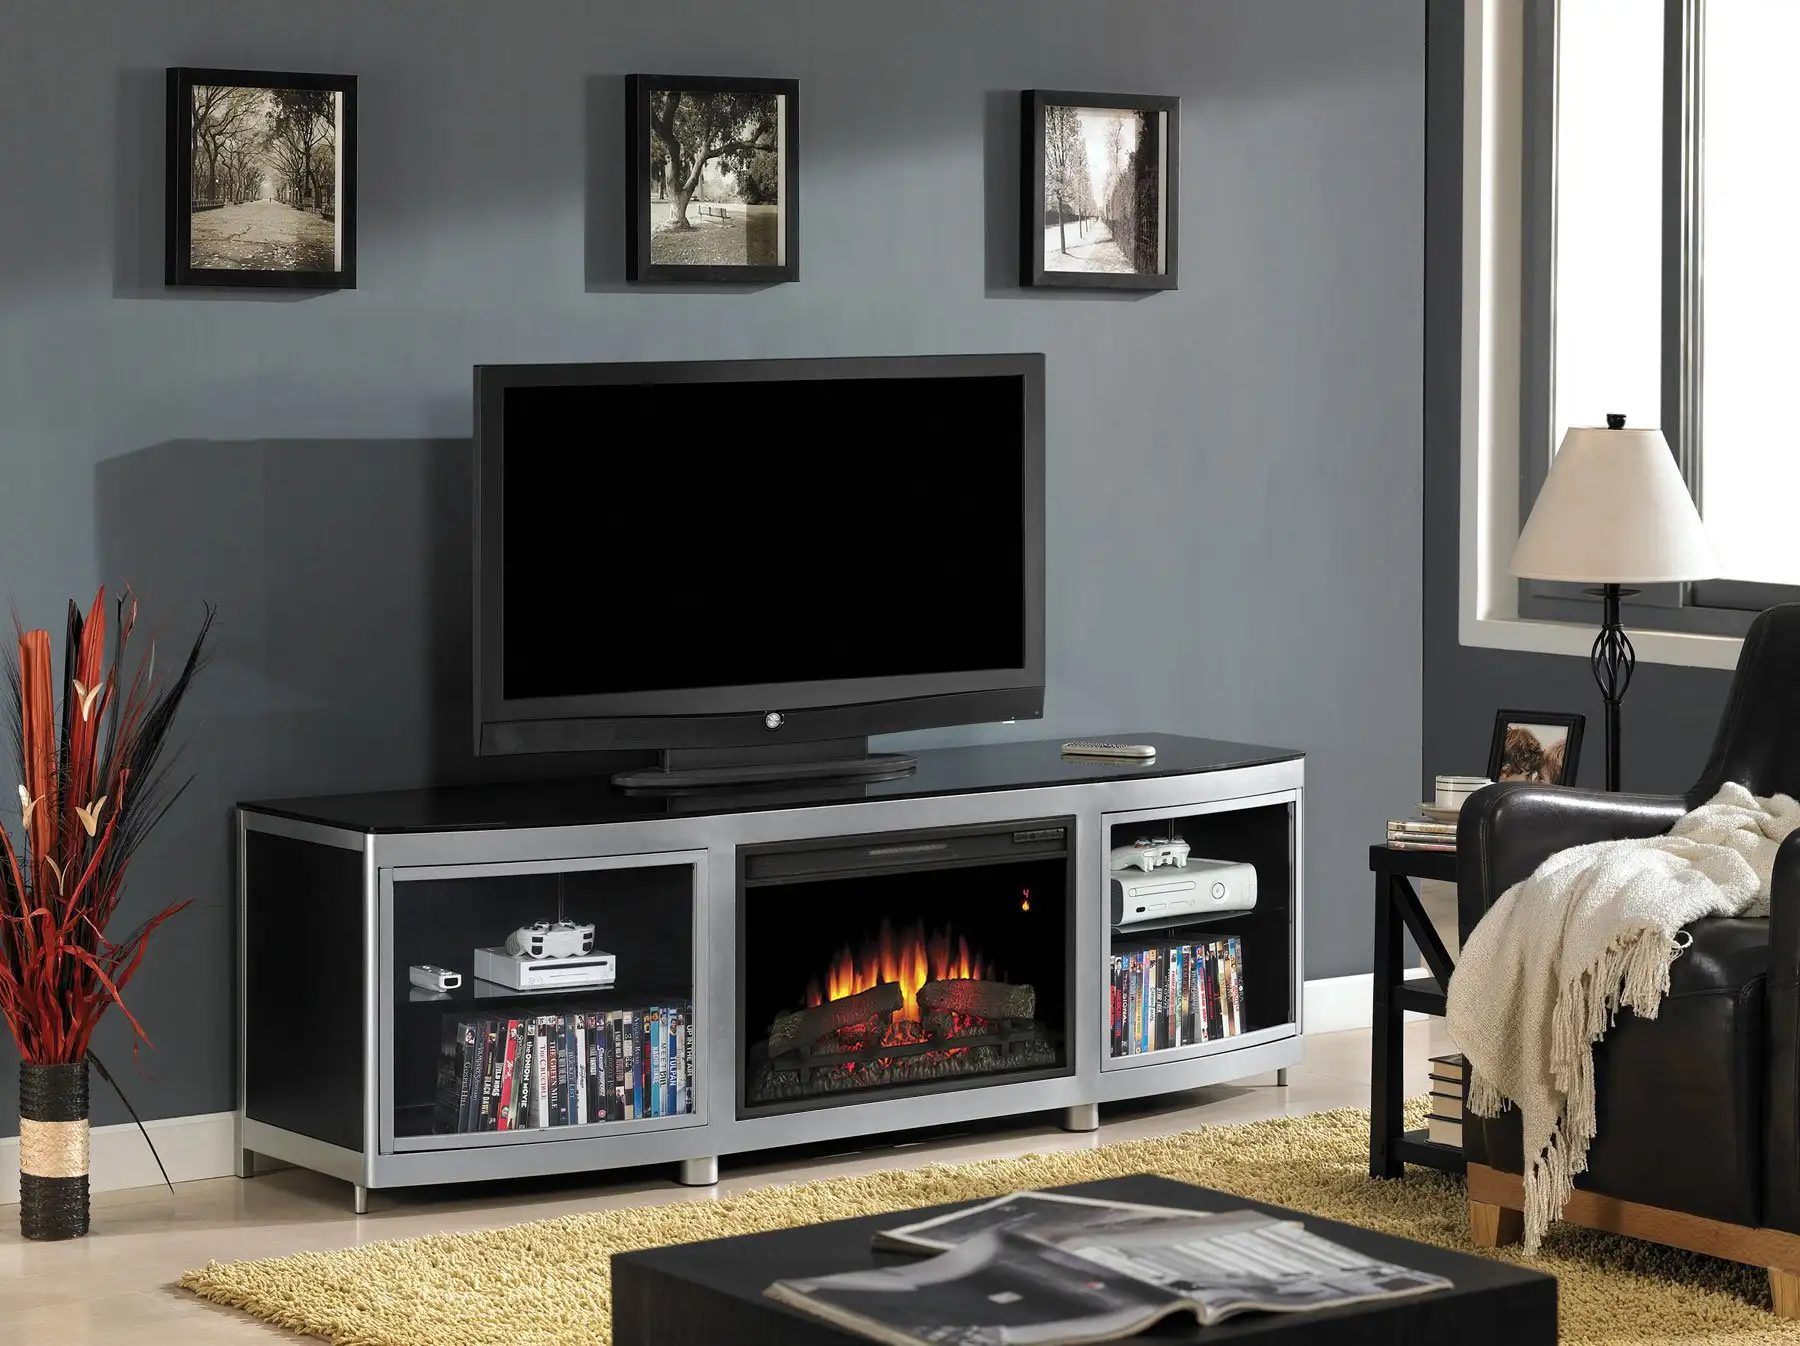 How to decorate living room with a fireplace and a TV